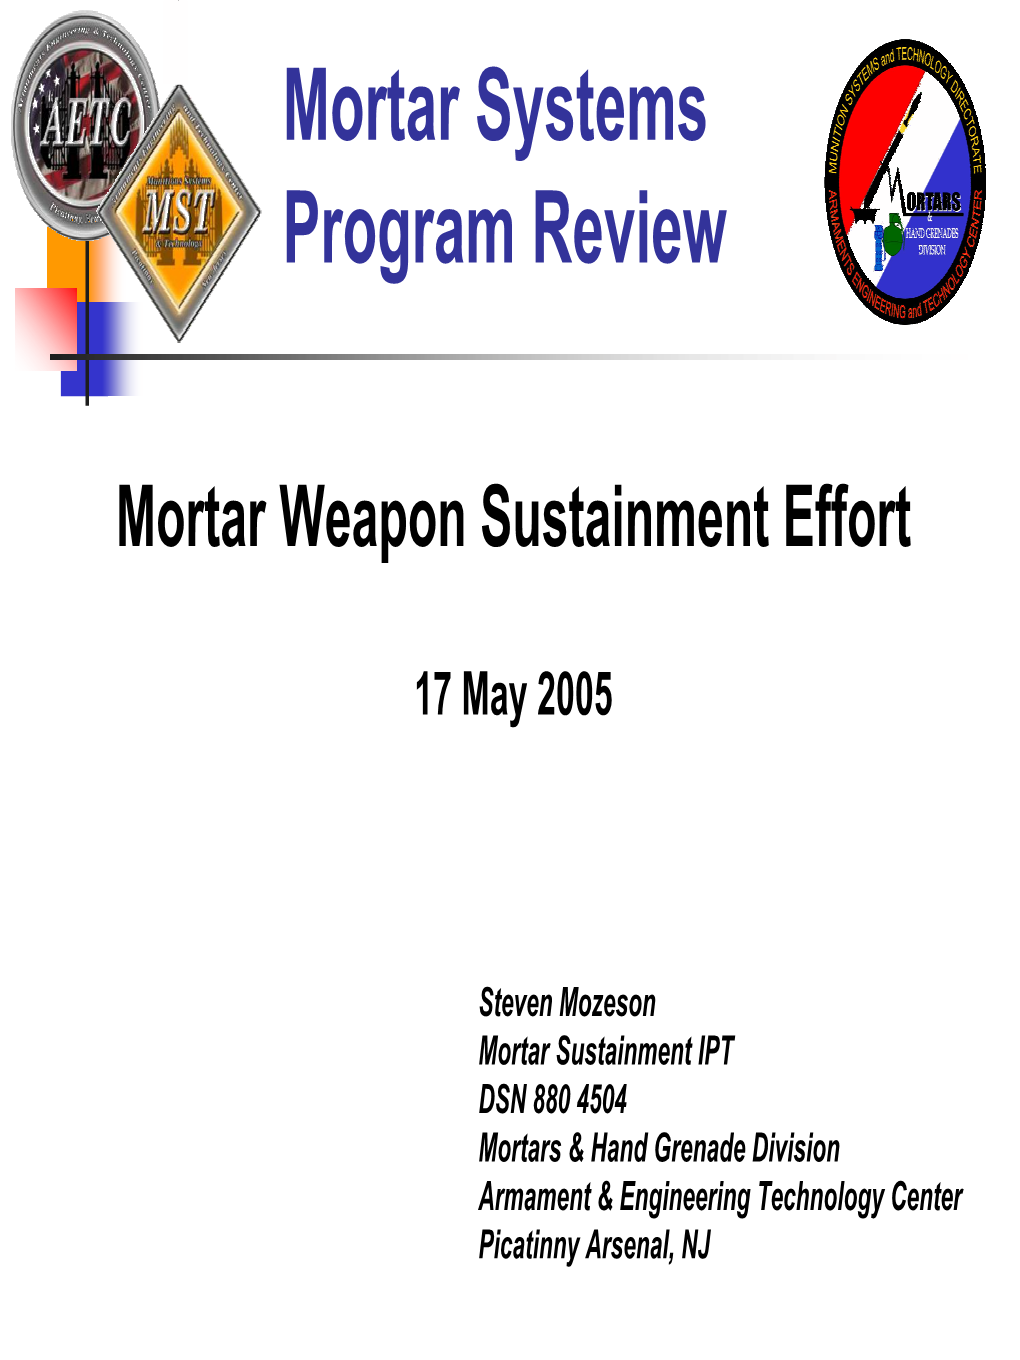 Mortar Systems Program Review